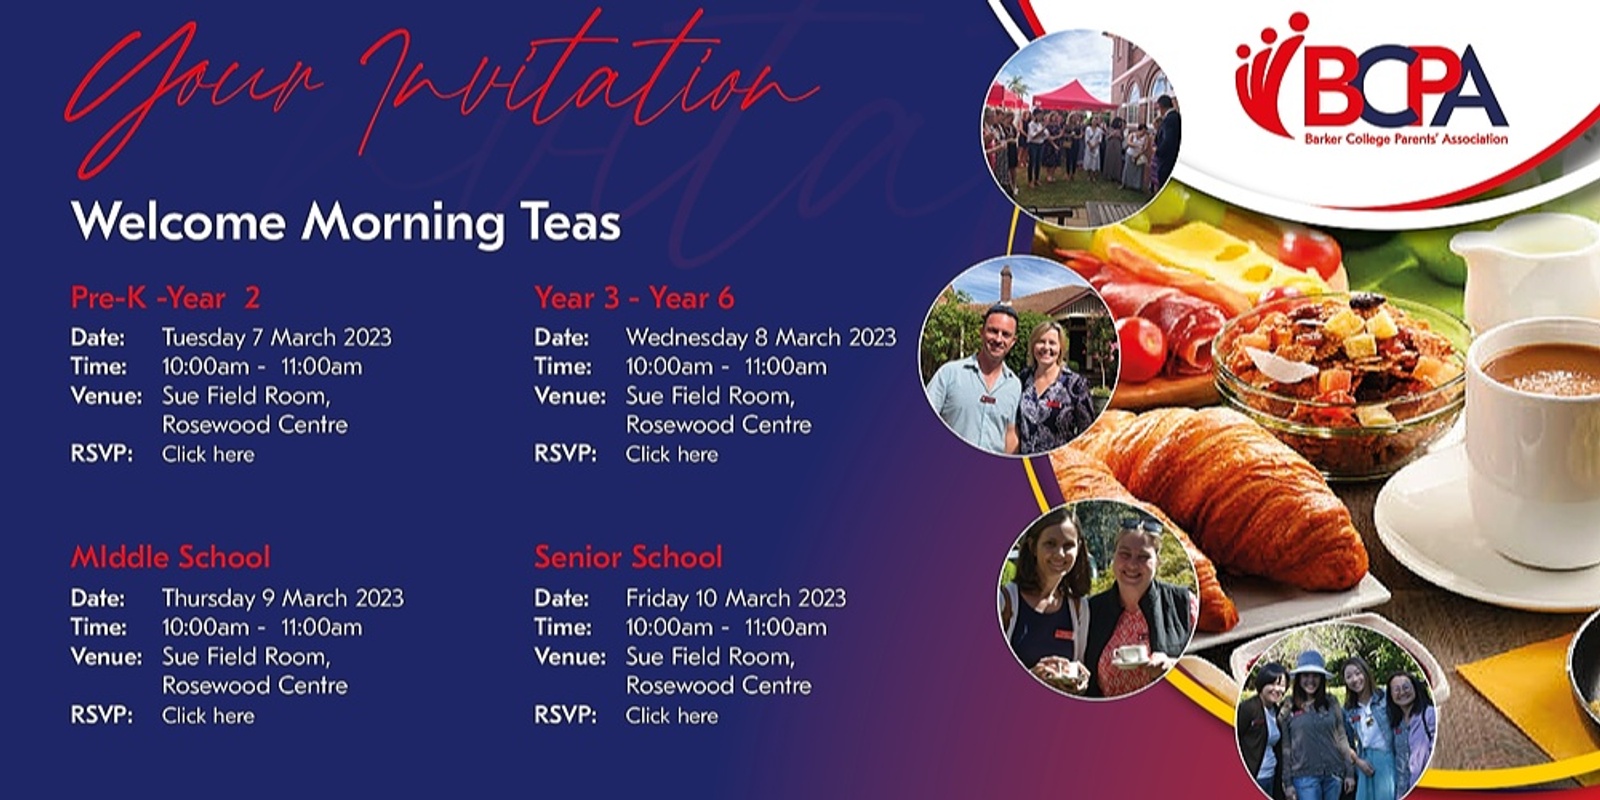 Banner image for Welcome Morning Tea - Parents of Middle School (Year 7 to 9) students